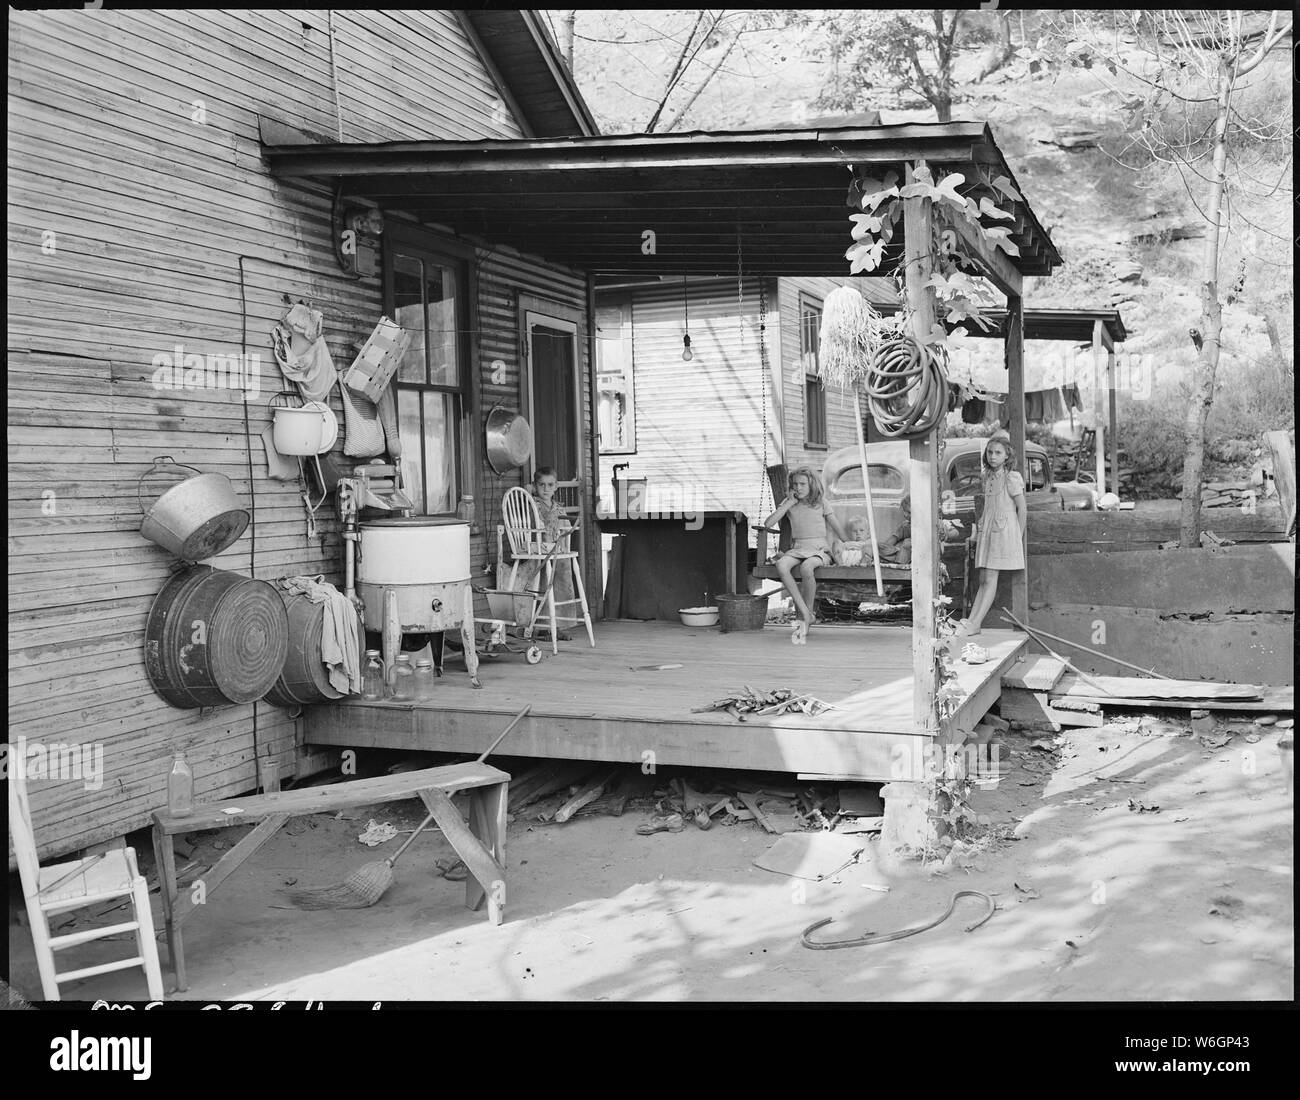 Front porch of home of Virgil Price, miner. They have lived here 12 years. Have 4 children, 2 beds, pay rent $10 per month, electricity is extra, running water is outside on porch. Black Mountain Corporation, 30-31 Mines, Kenvir, Harlan County, Kentucky. Stock Photo